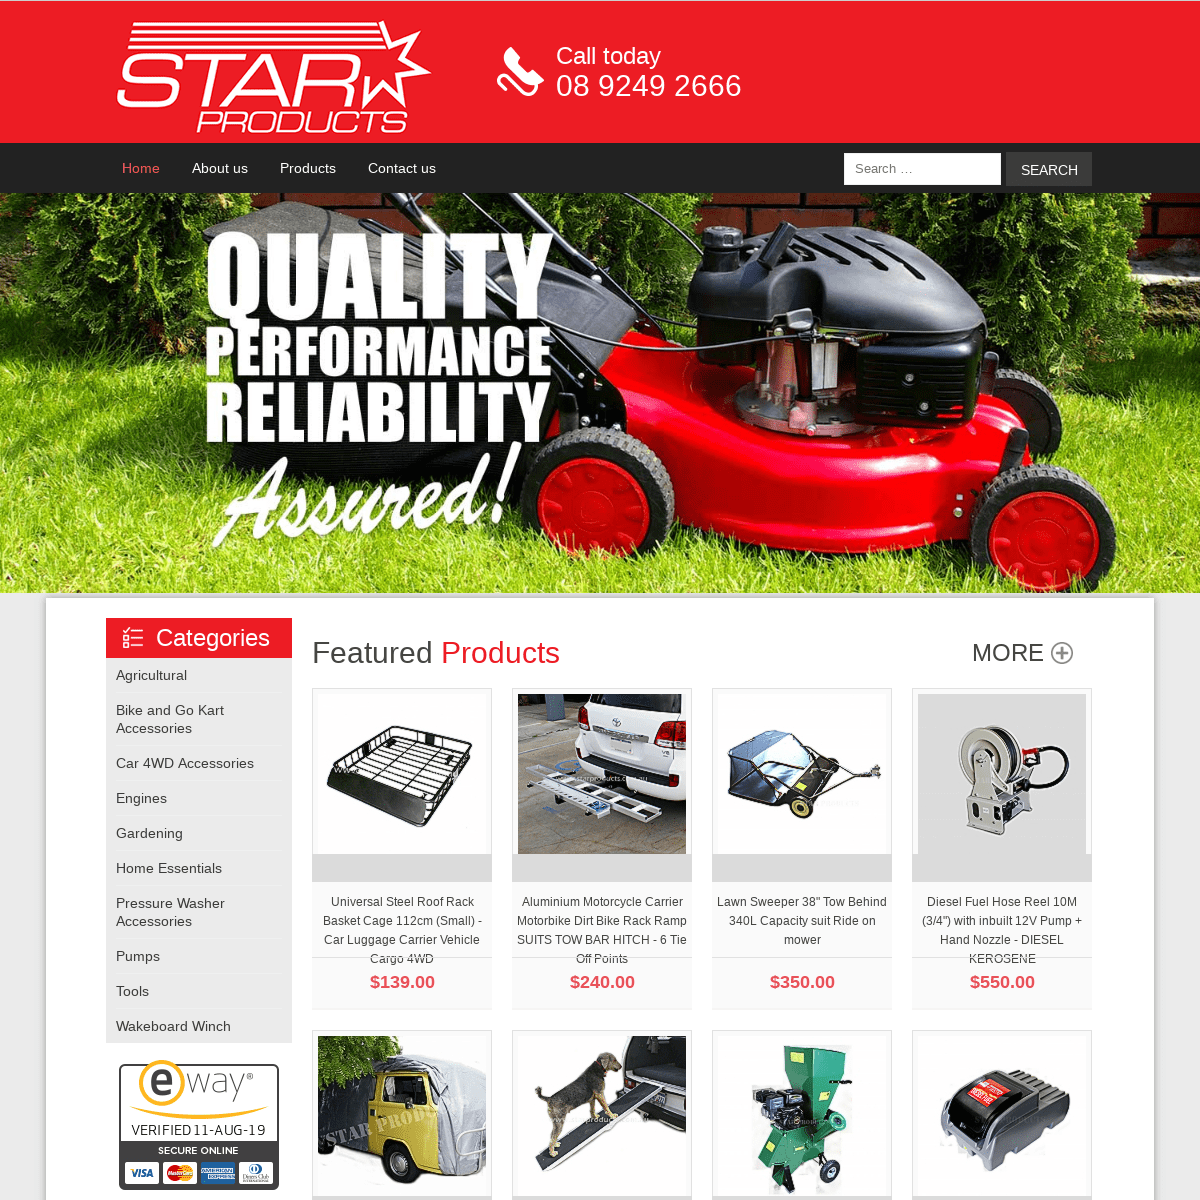 Star Products - 4WD Gear, Gokart Parts, Small Engines and more.